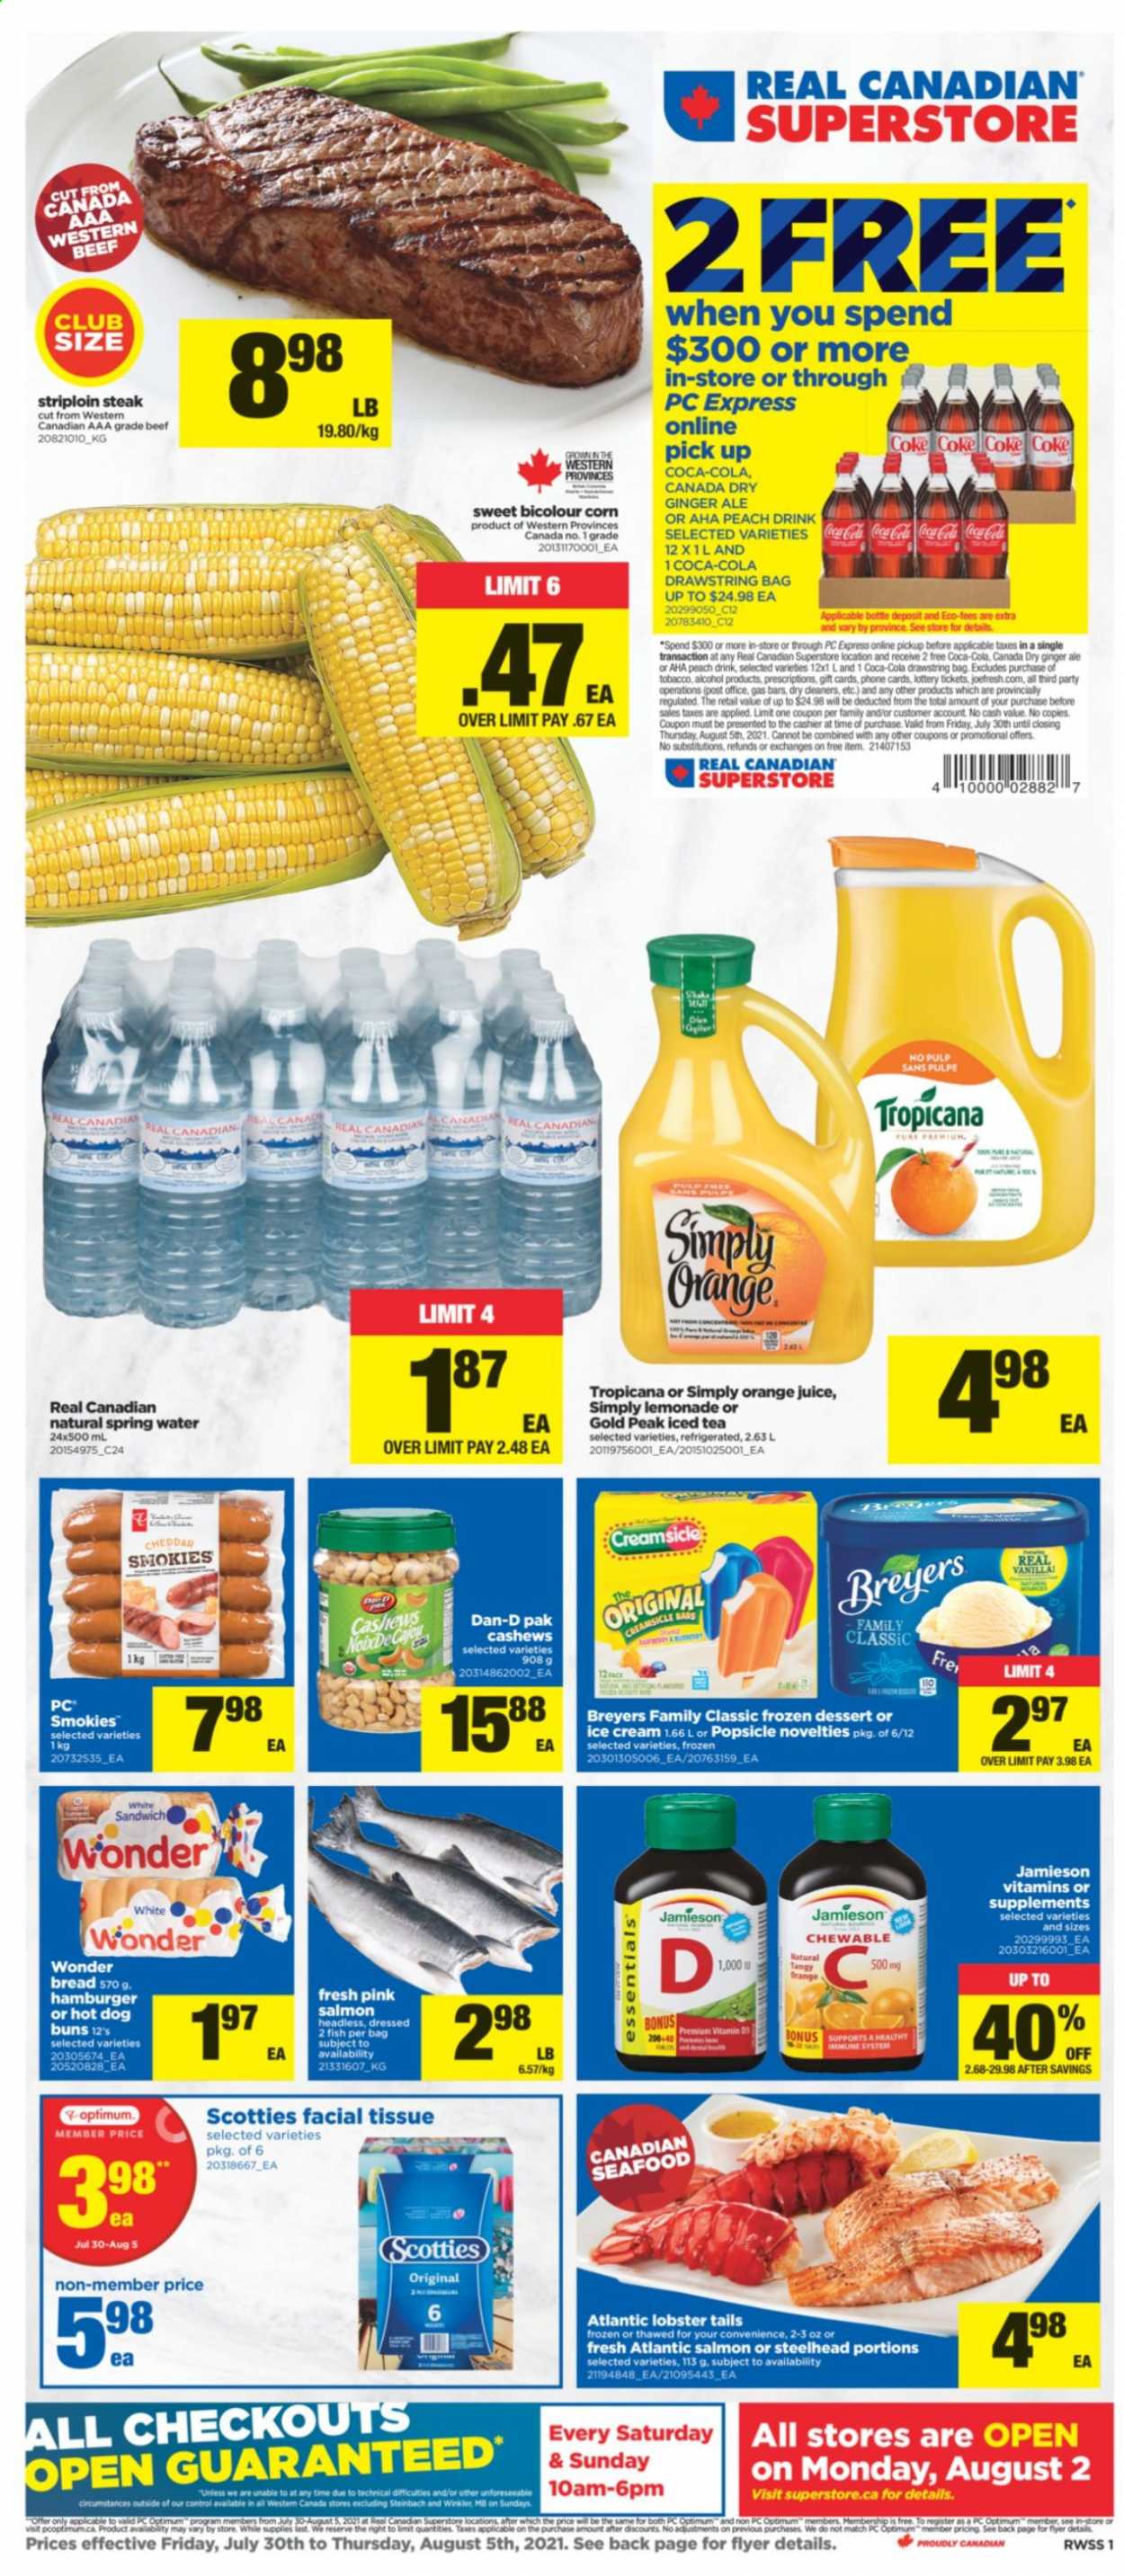 thumbnail - Real Canadian Superstore Flyer - July 30, 2021 - August 05, 2021 - Sales products - bread, buns, corn, lobster, salmon, seafood, fish, lobster tail, sandwich, cheddar, cheese, shake, ice cream, Dan-D Pak, cashews, Canada Dry, Coca-Cola, ginger ale, lemonade, orange juice, juice, ice tea, spring water, alcohol, beef meat, striploin steak, tissues, Optimum, vitamin D3, steak. Page 1.